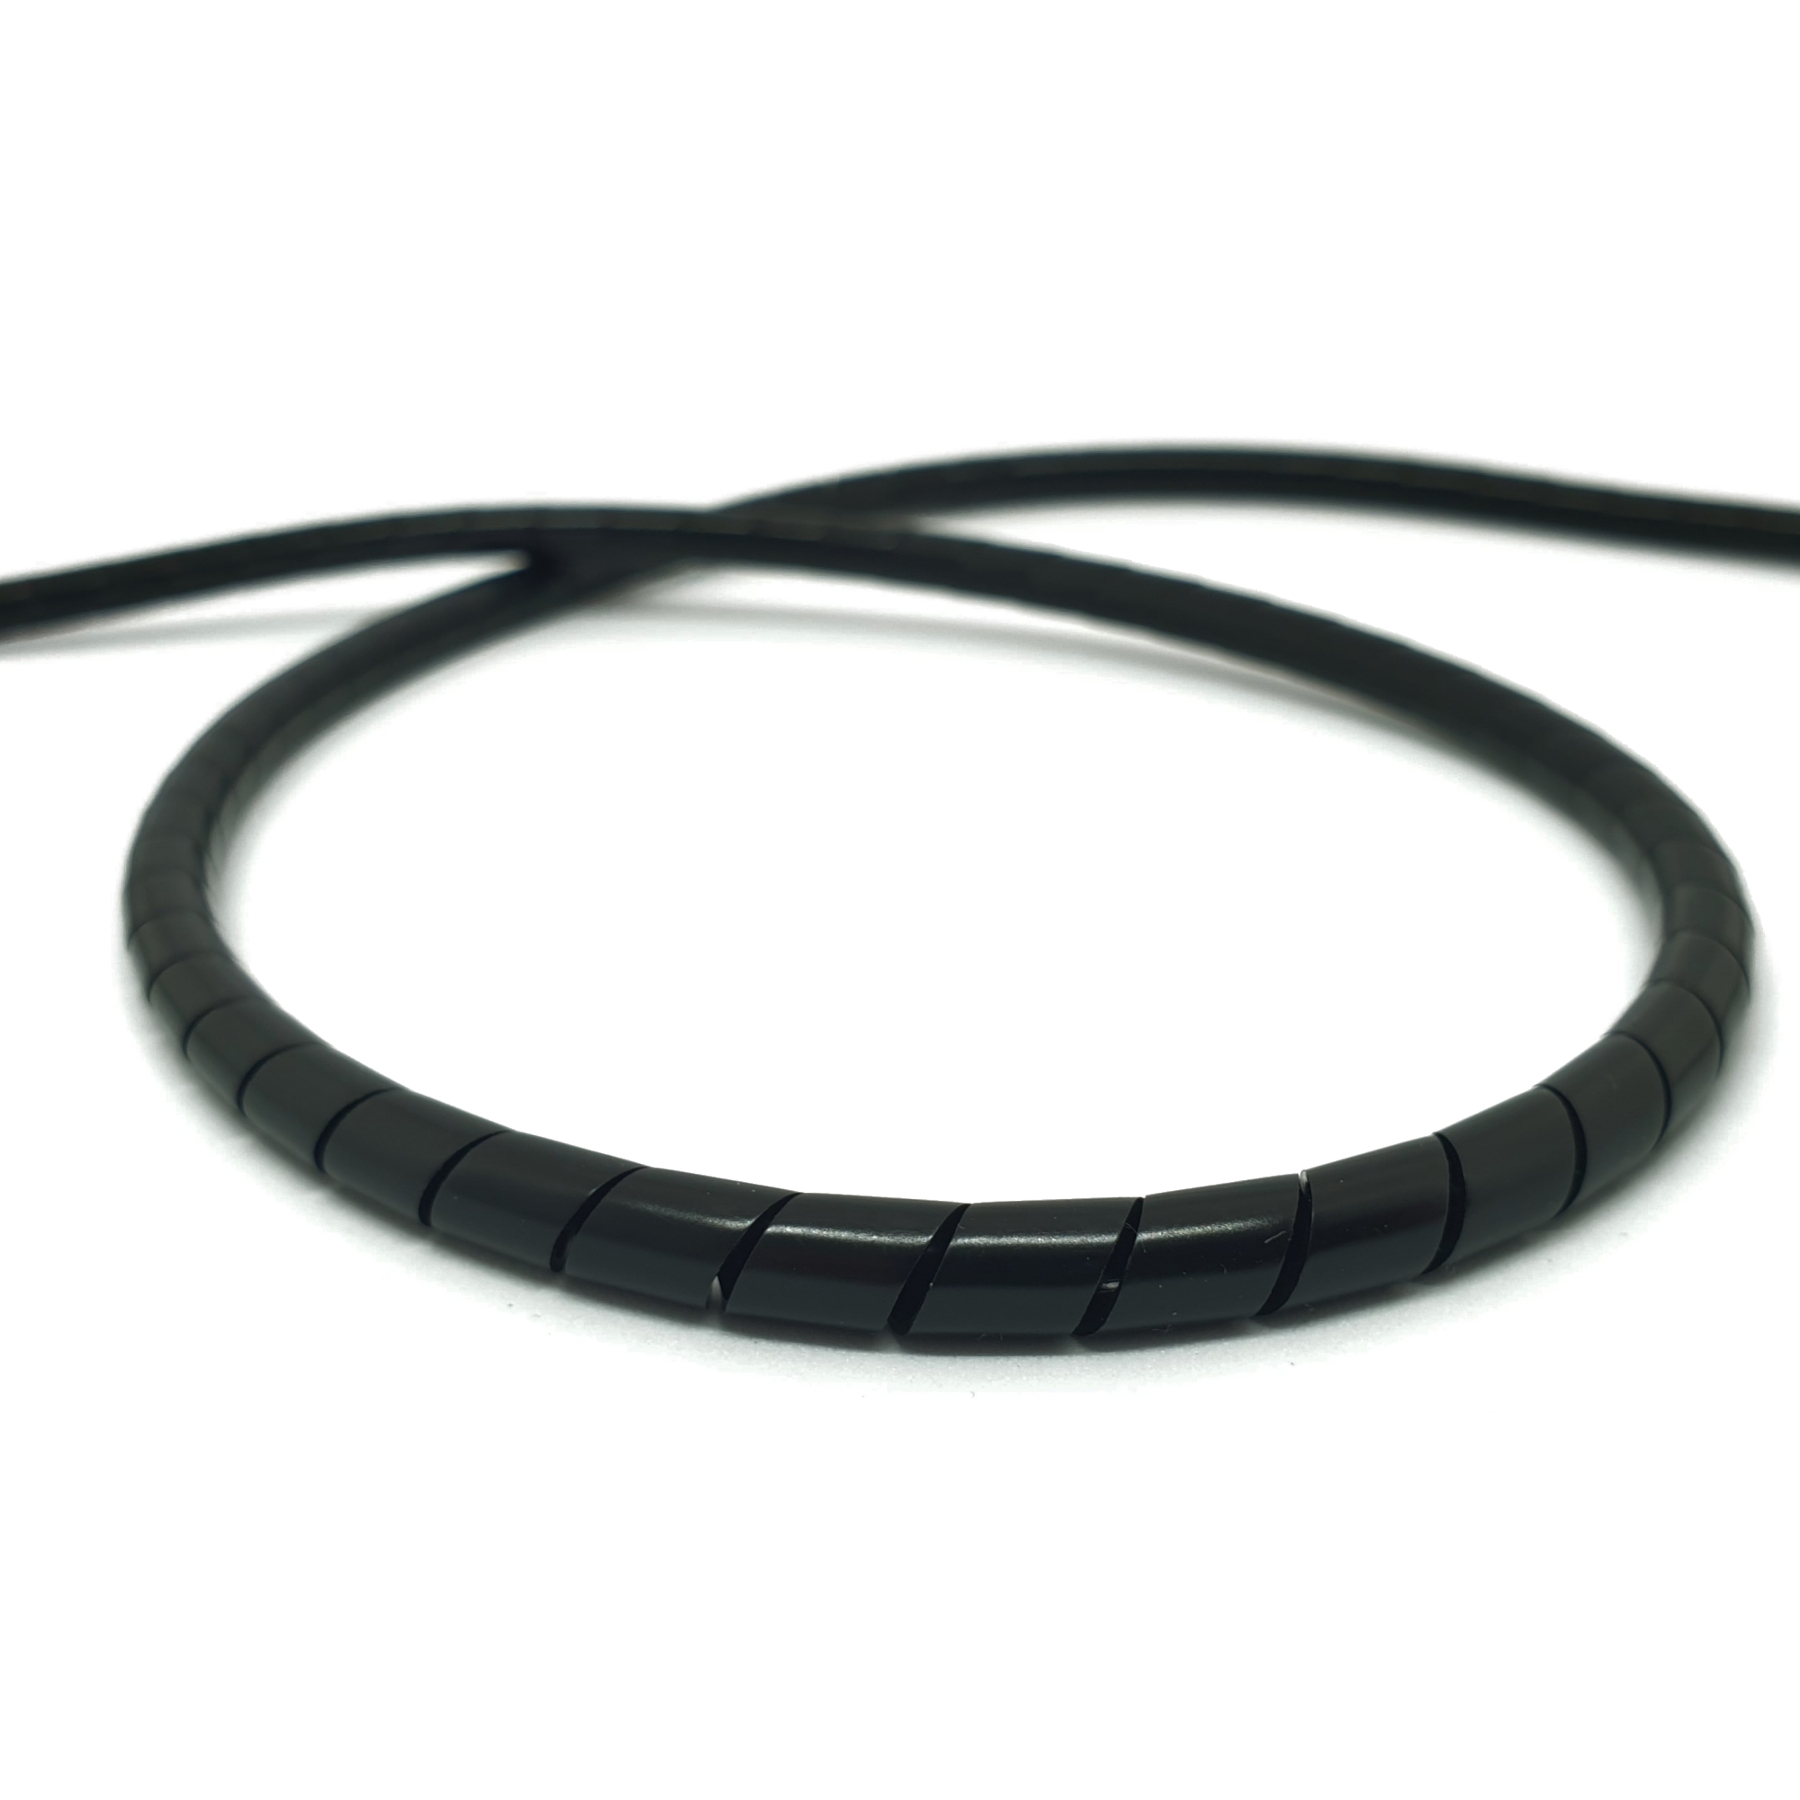 Productfoto van capgo Blue Line Spiral Wrap for Outer Cable / Wire Organization - 2000 mm - black